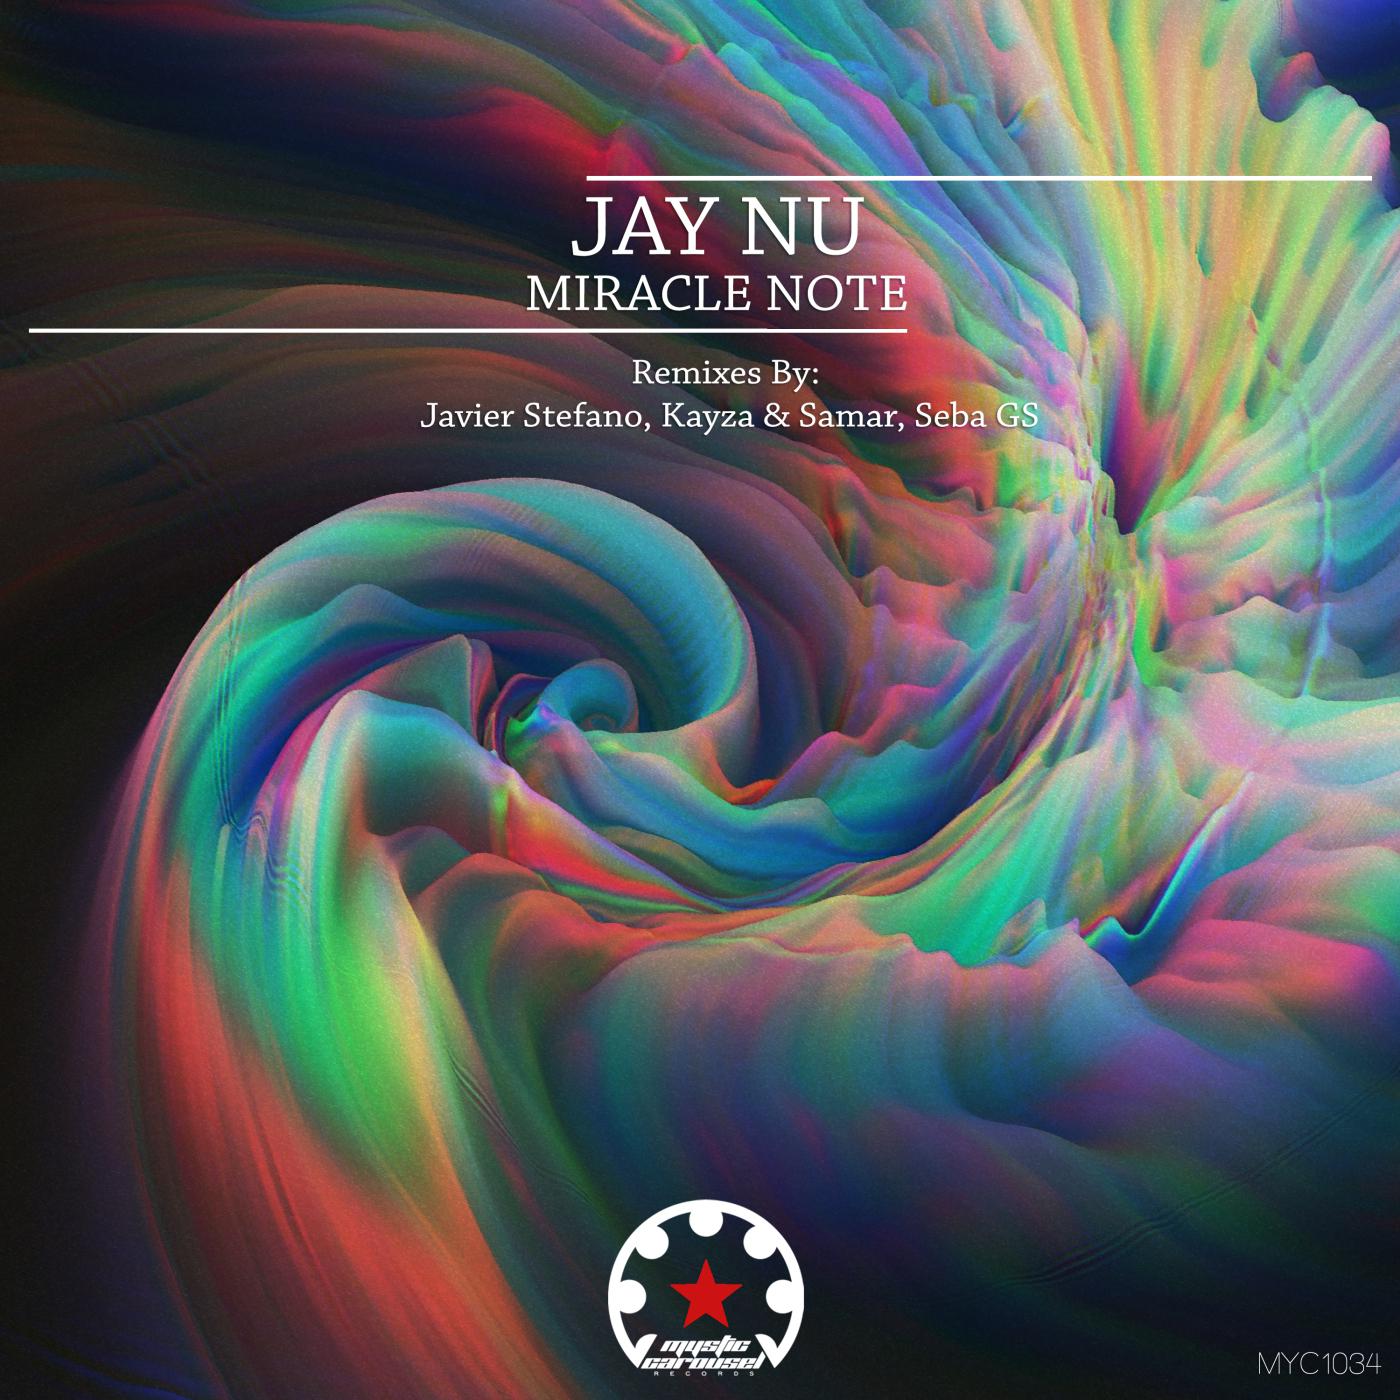 Jay Nu - Miracle Note (Javier Stefano Remix)